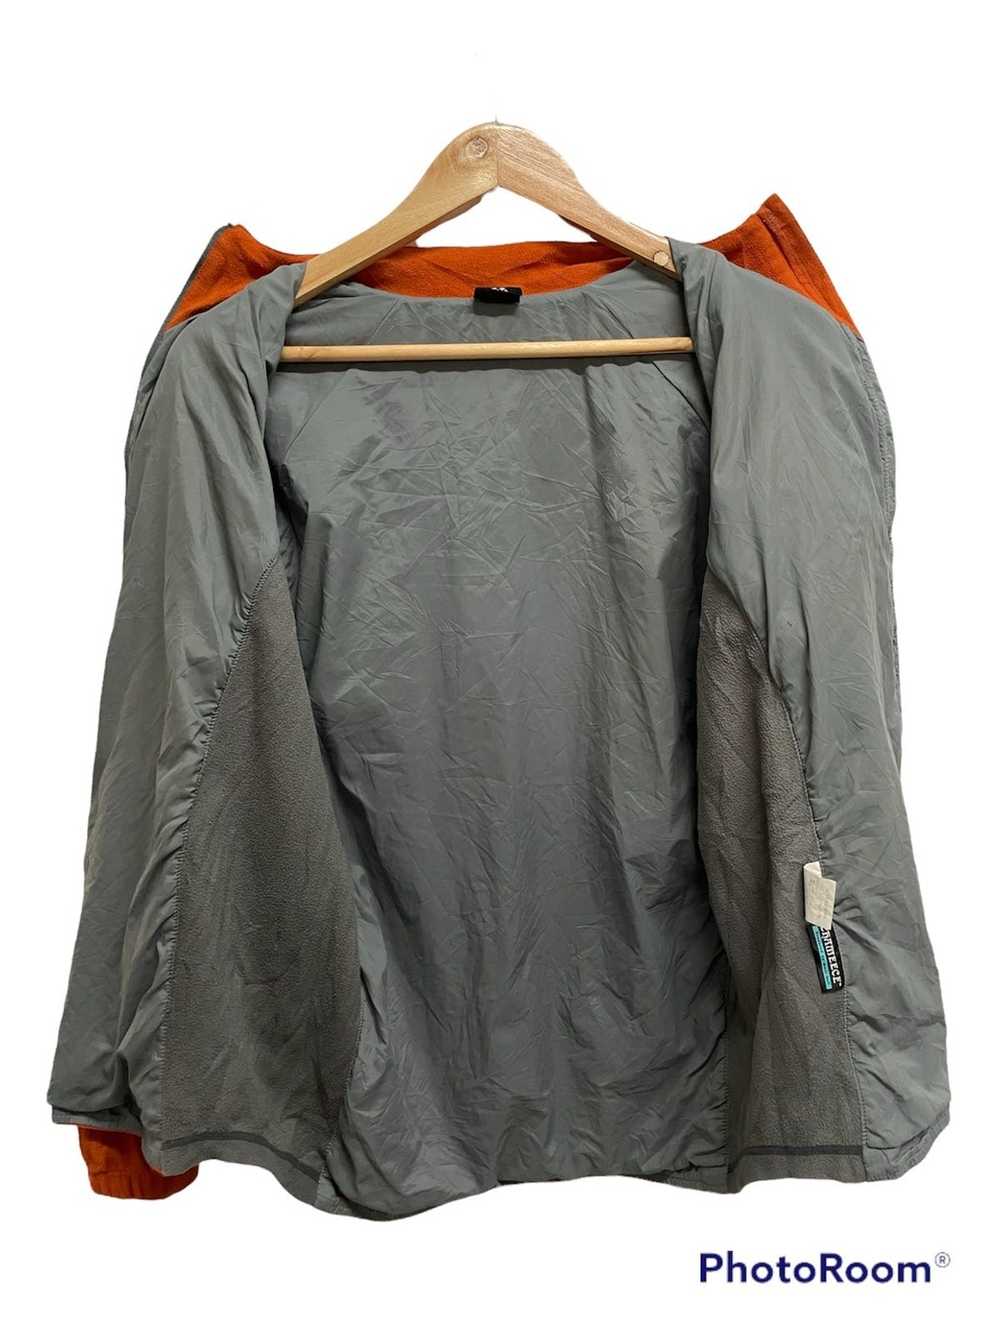 Montbell × Outdoor Life Montbell Fleece For Women - image 3